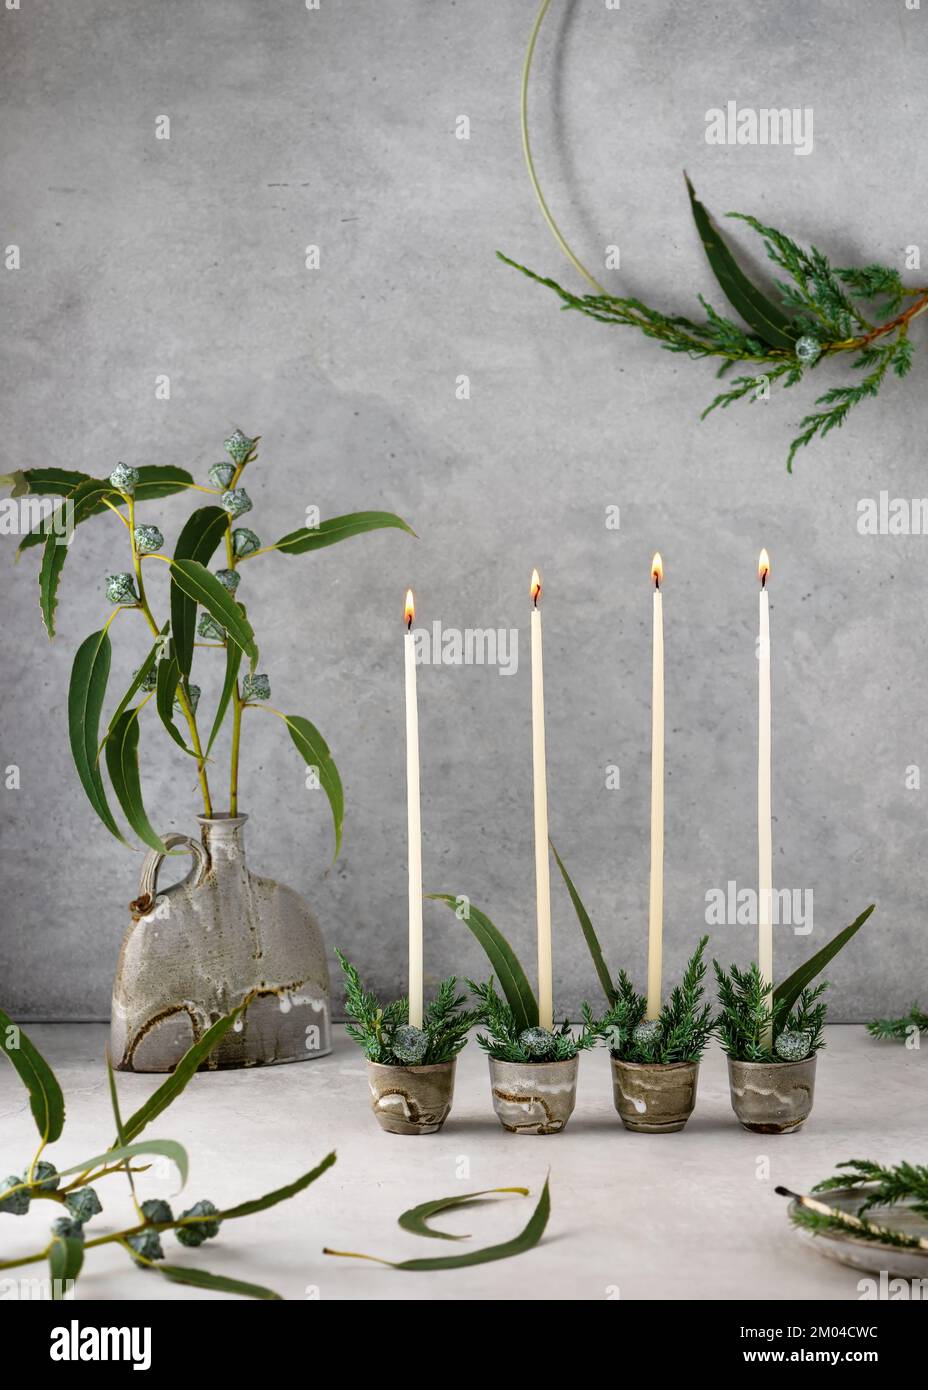 4. Advent. Christmas decor with white narrow candles, eucalyptus leaves and fruits in four ceramic mugs. Handmade home decoration. Selective focus. Stock Photo